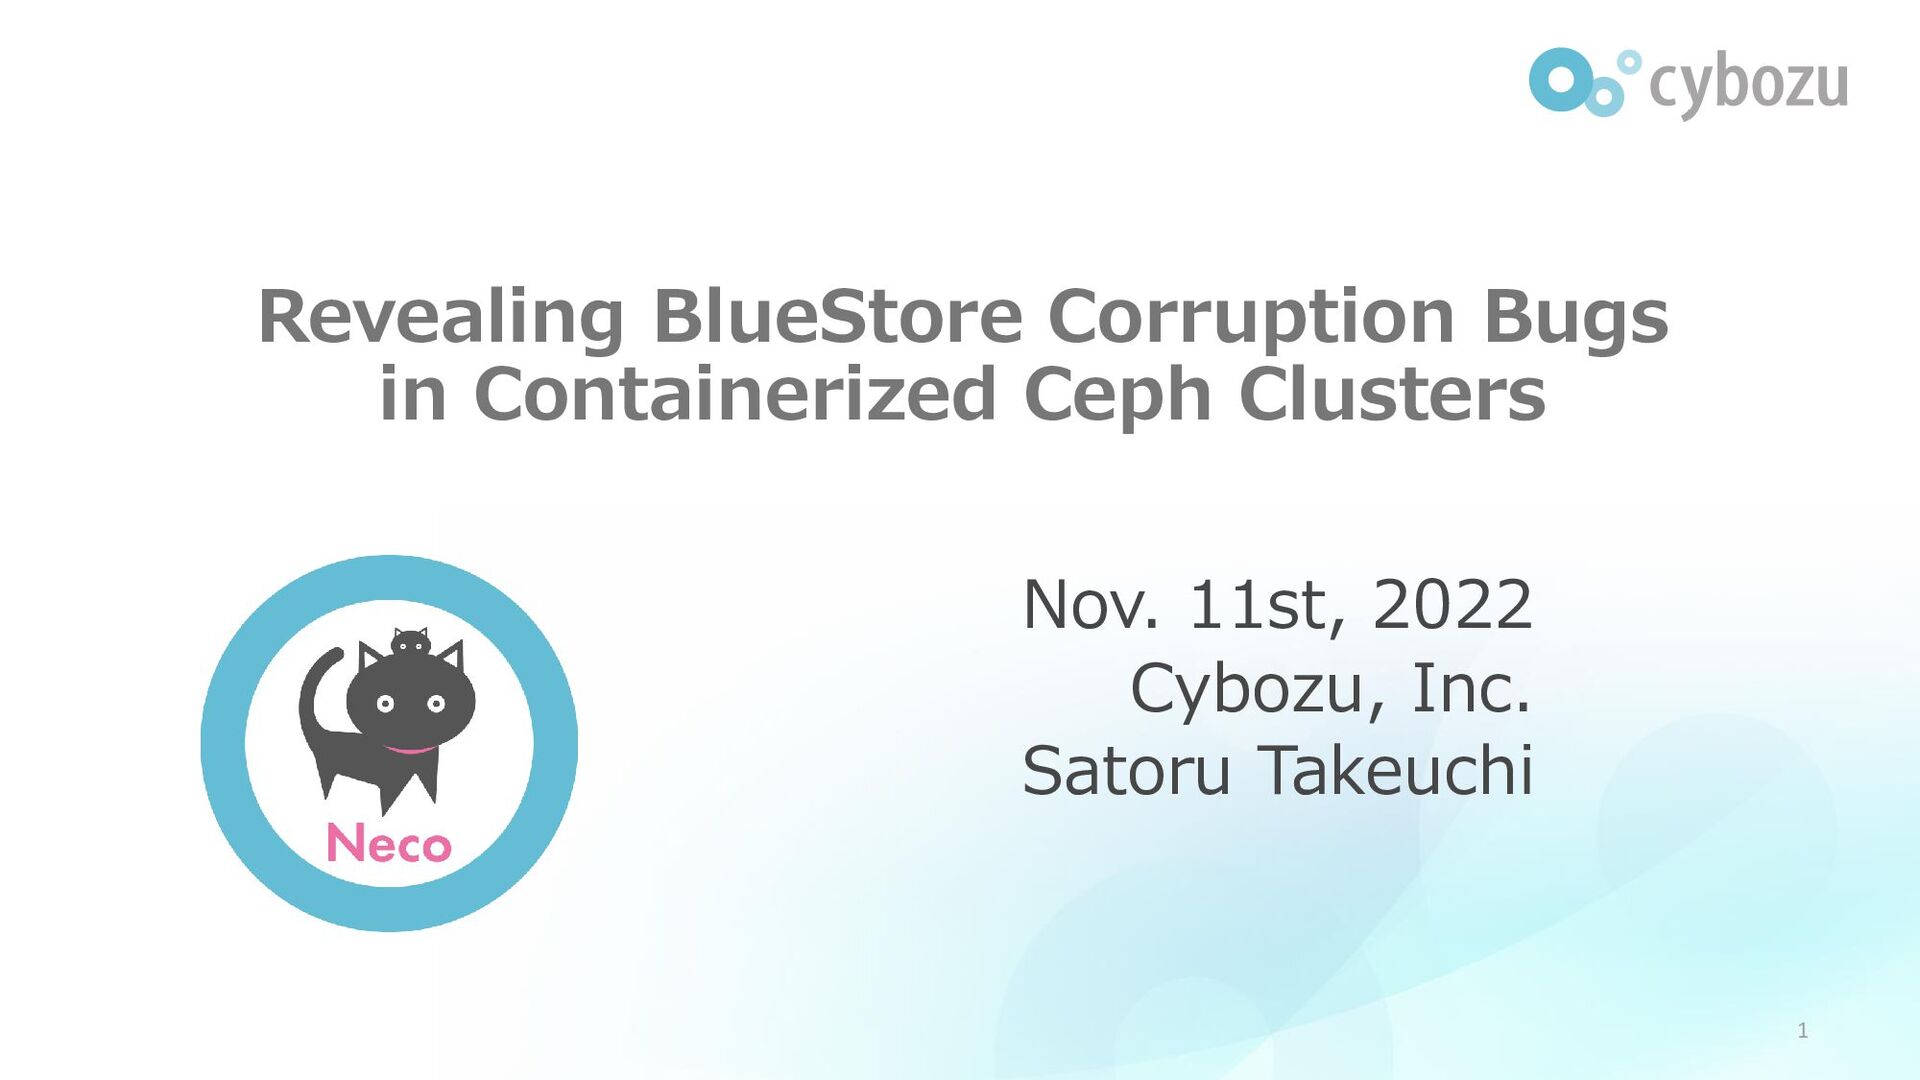 Slide Top: Revealing BlueStore Corruption Bugs in Containerized Ceph Clusters